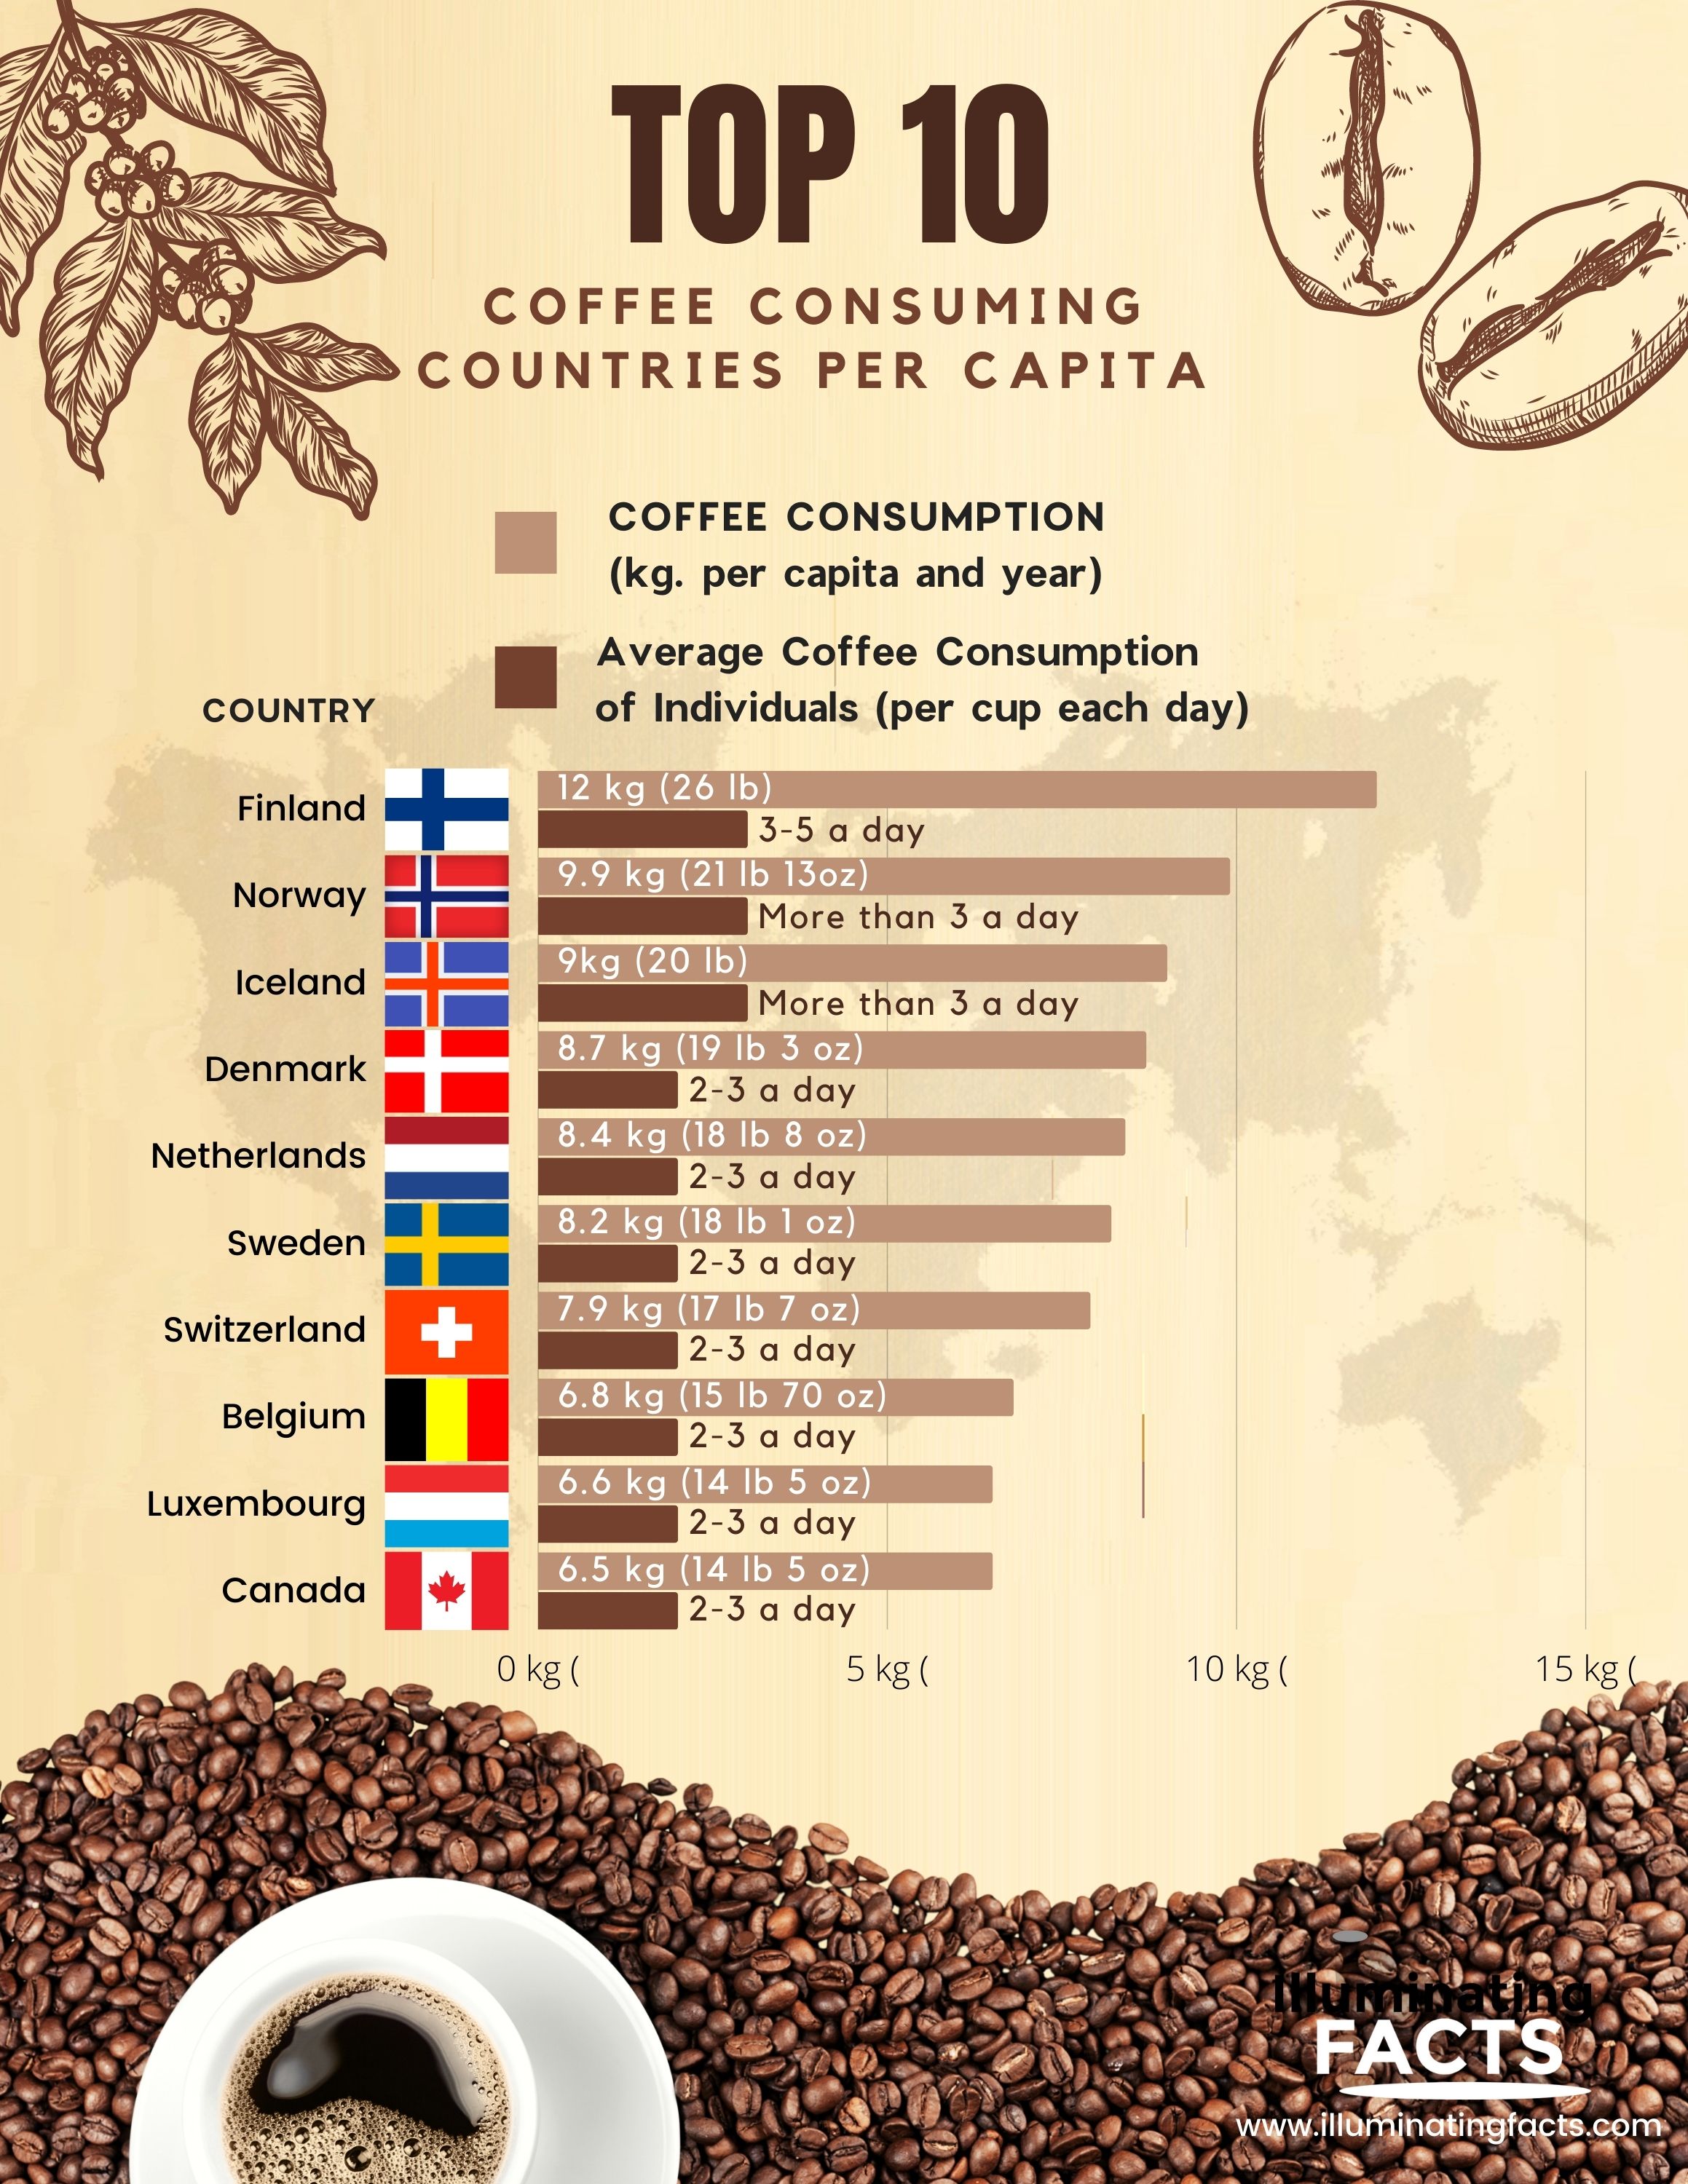 Top 10 coffee consuming countries